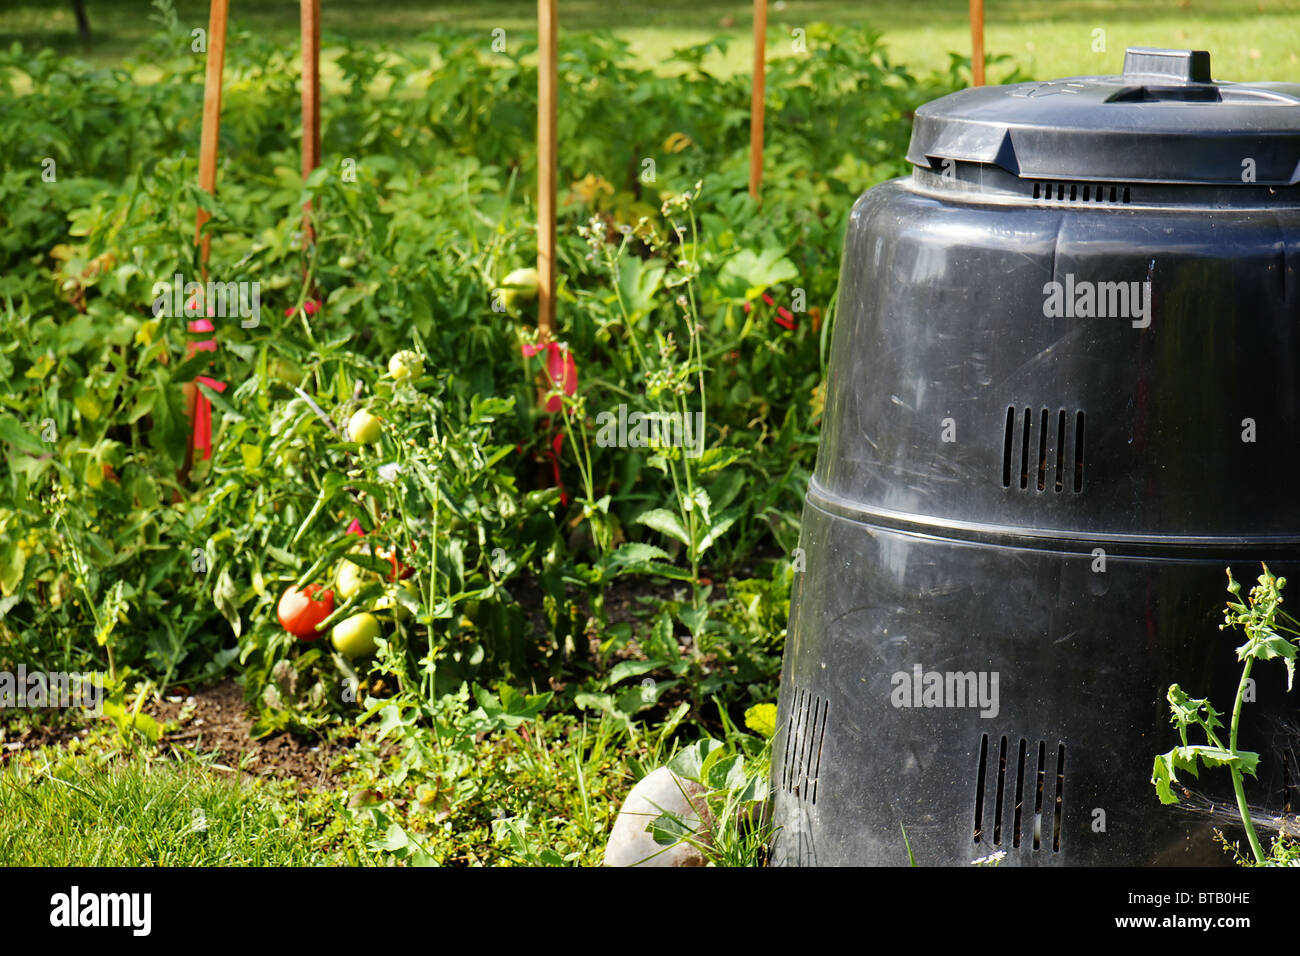 Compost bin made of recycled plastic next to beautiful vegetable garden with ripe tomatoes. Recycling, green, concept. Stock Photo